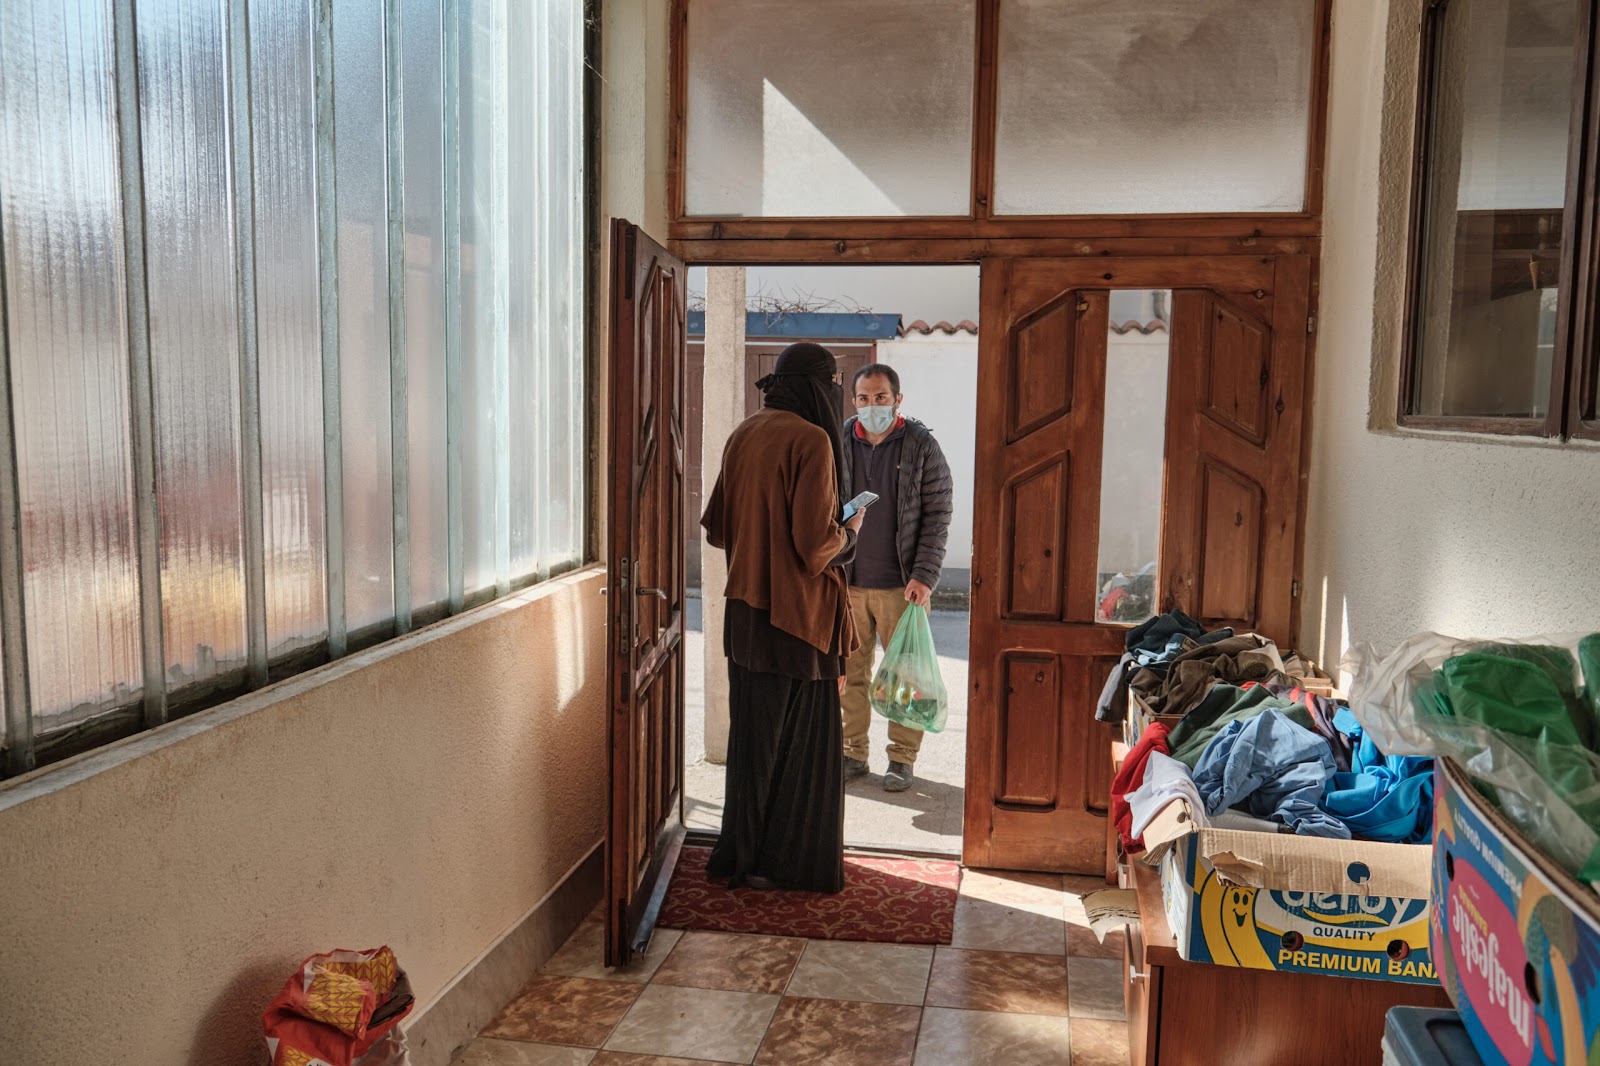 Azra chats with a man who came to her house to get food and clothes for himself and his family. | Photo: Chiara Fabbro